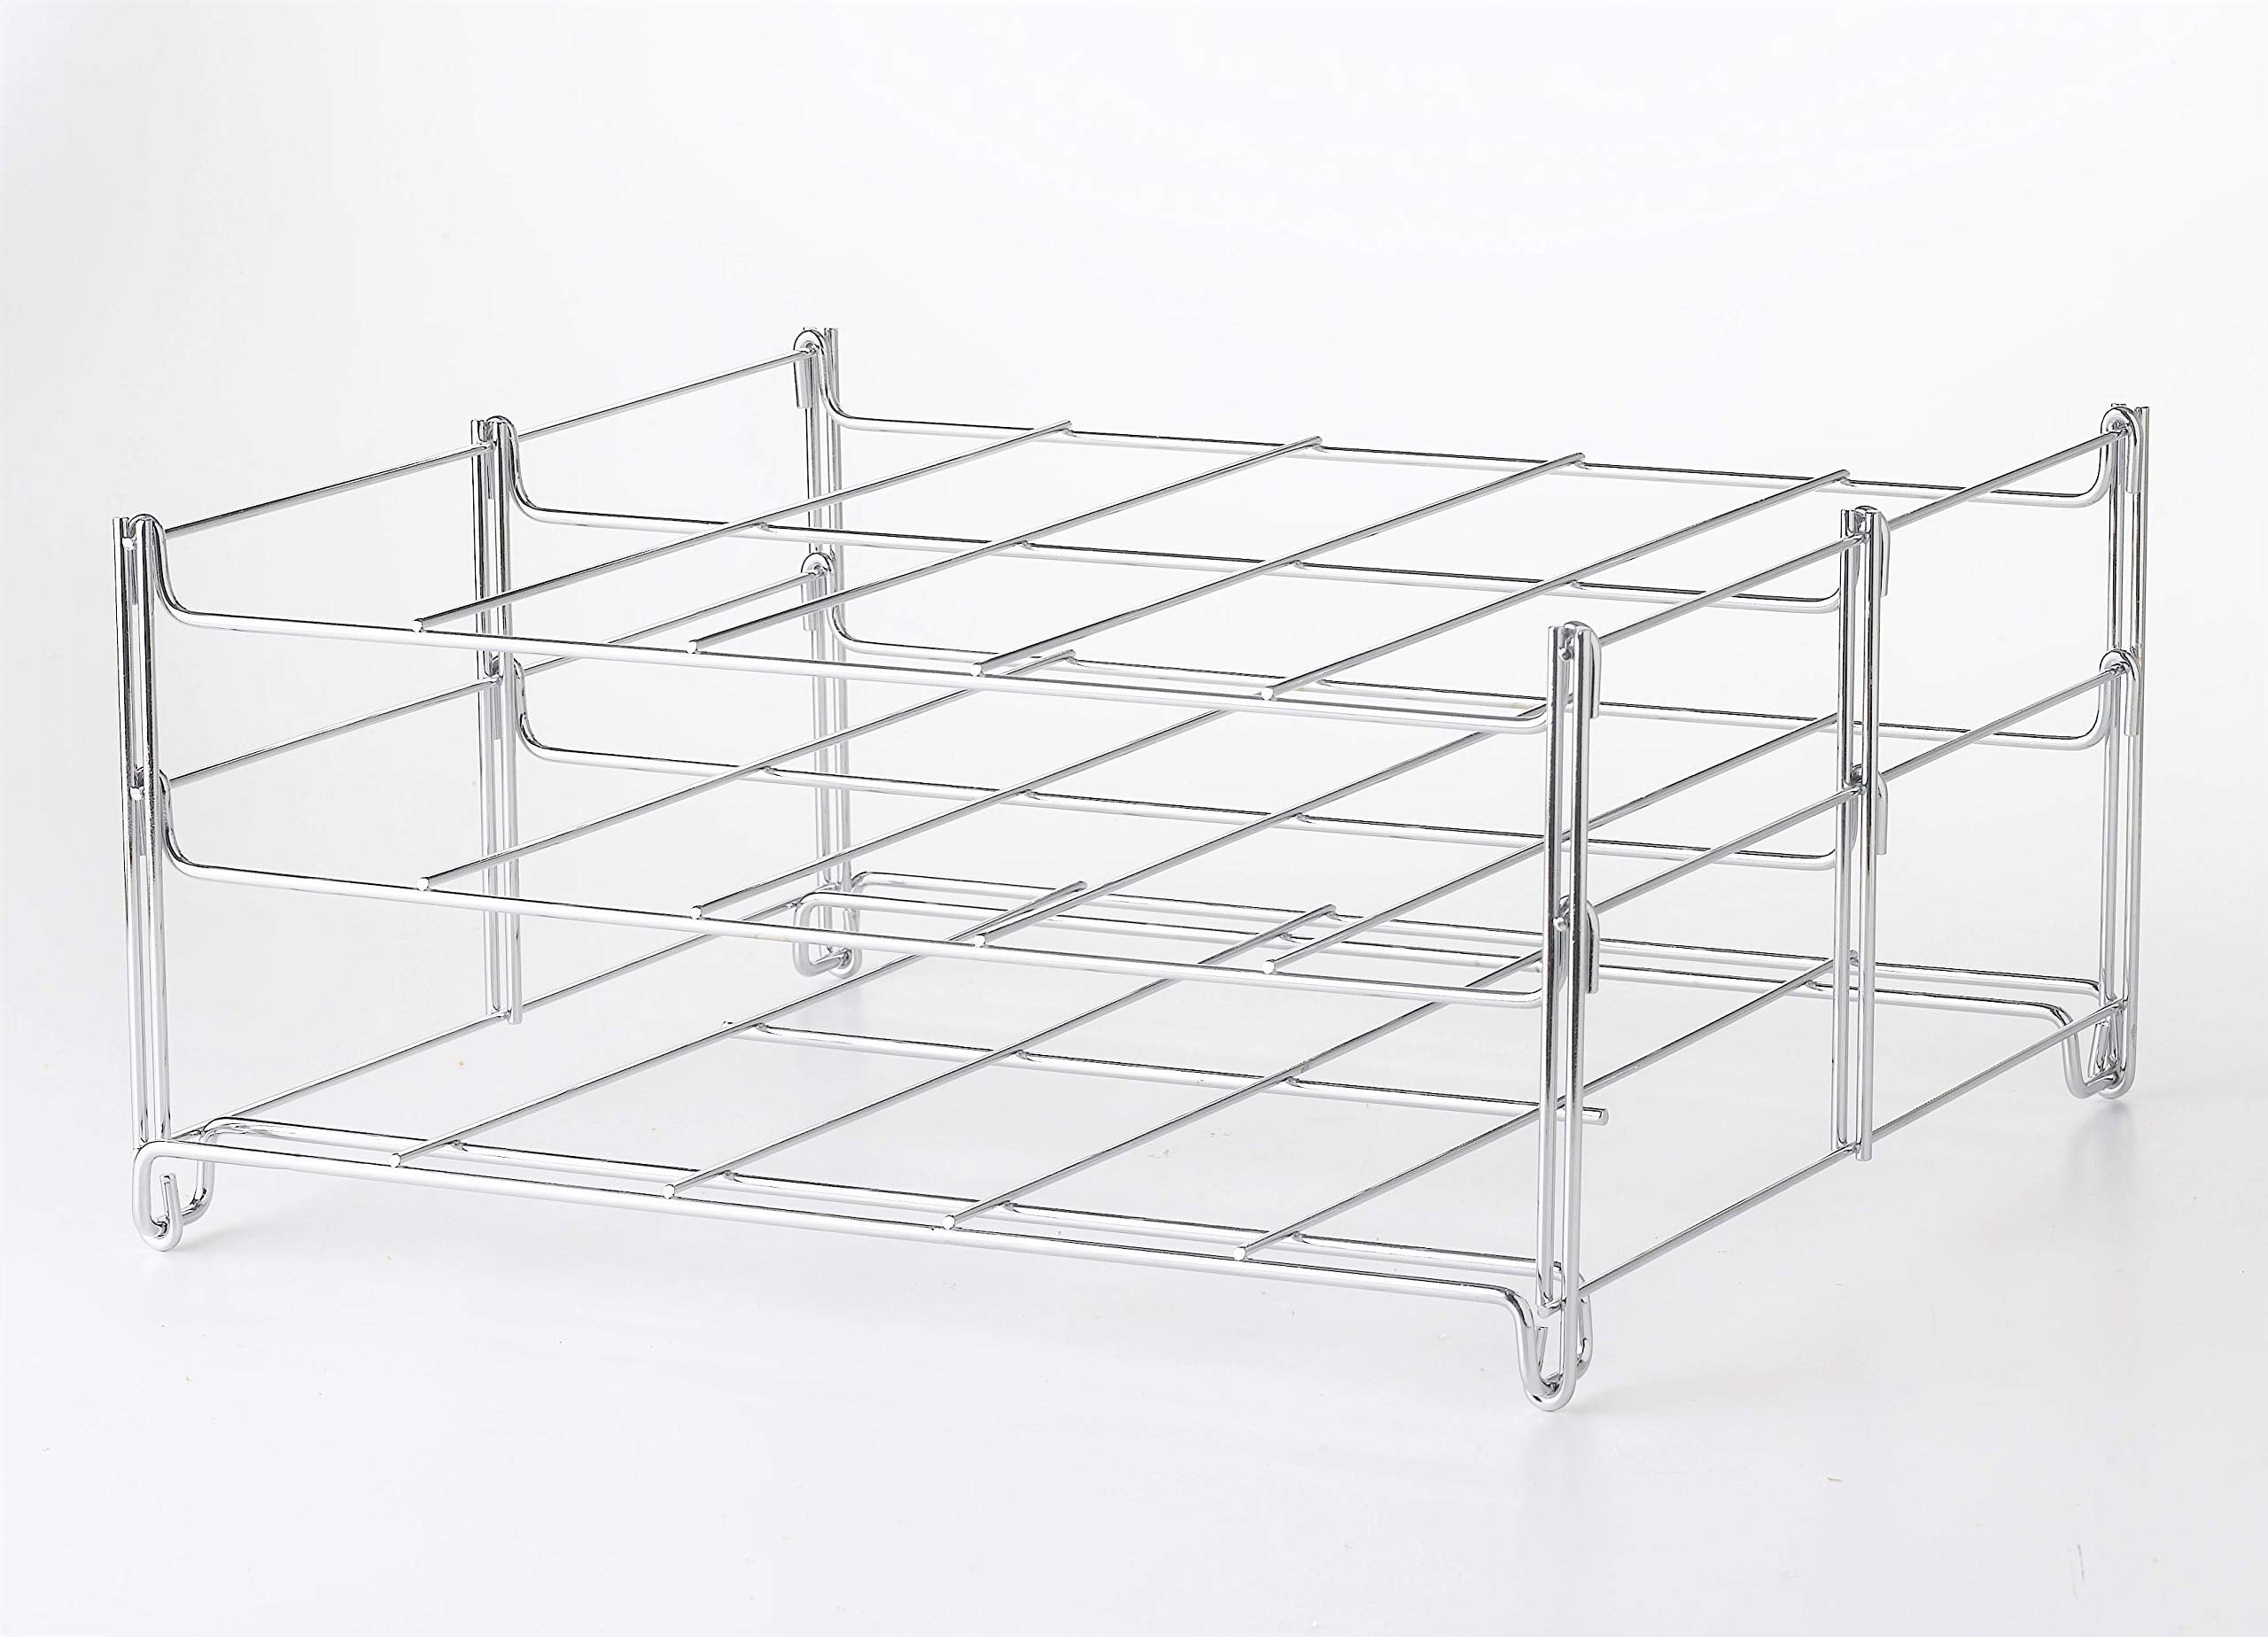  Nifty 3-in-1 Baking Rack – Nickel Chrome Plating, Cooling & Baking  Rack, Multipurpose Kitchen Accessory, Folds Flat for Easy Storage, Use for  Cookies, Pizzas, Baked Goods: Oven Accessories: Home & Kitchen